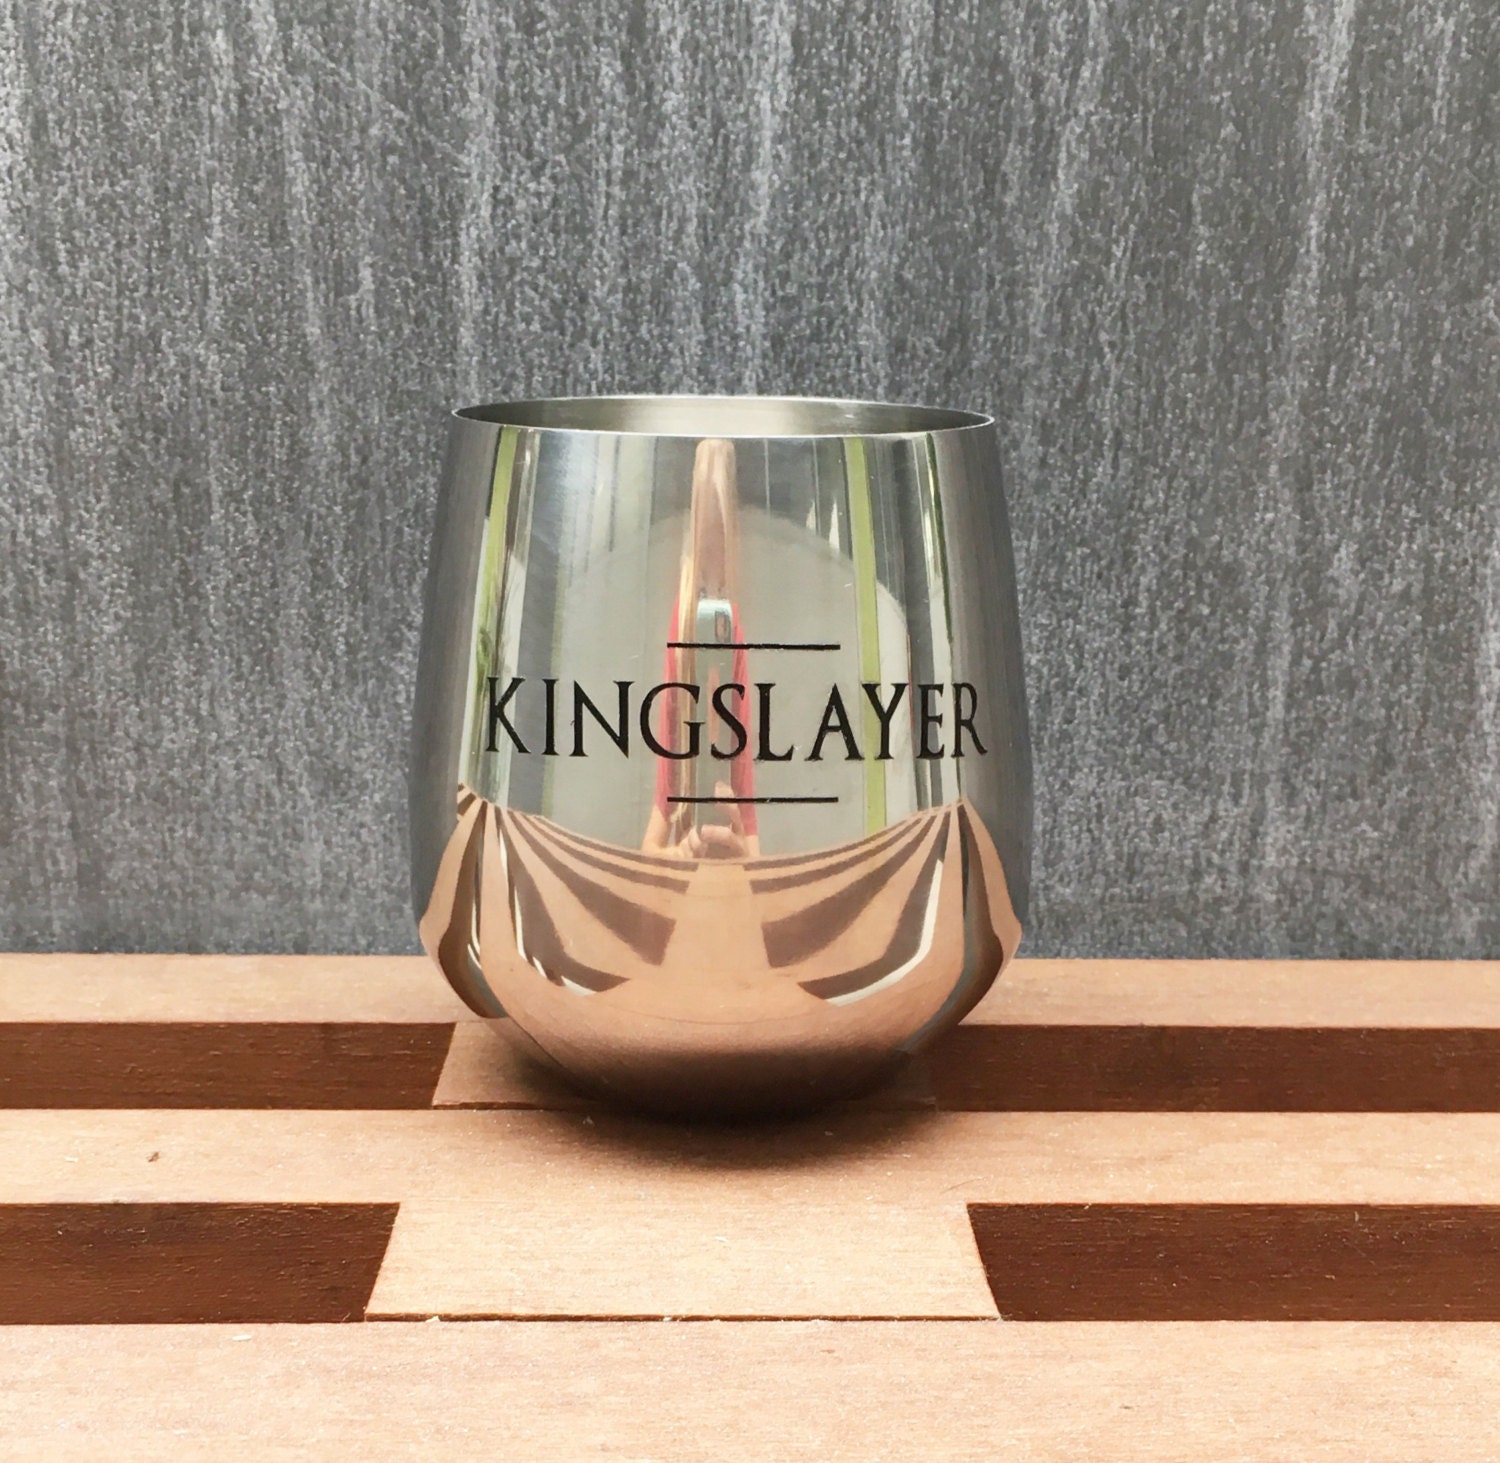 Kingslayer Stainless Steel Wine Glass, Game of Thrones, stemless wine glass, wine glass with decals, Jaime Lannister, Winter is Coming